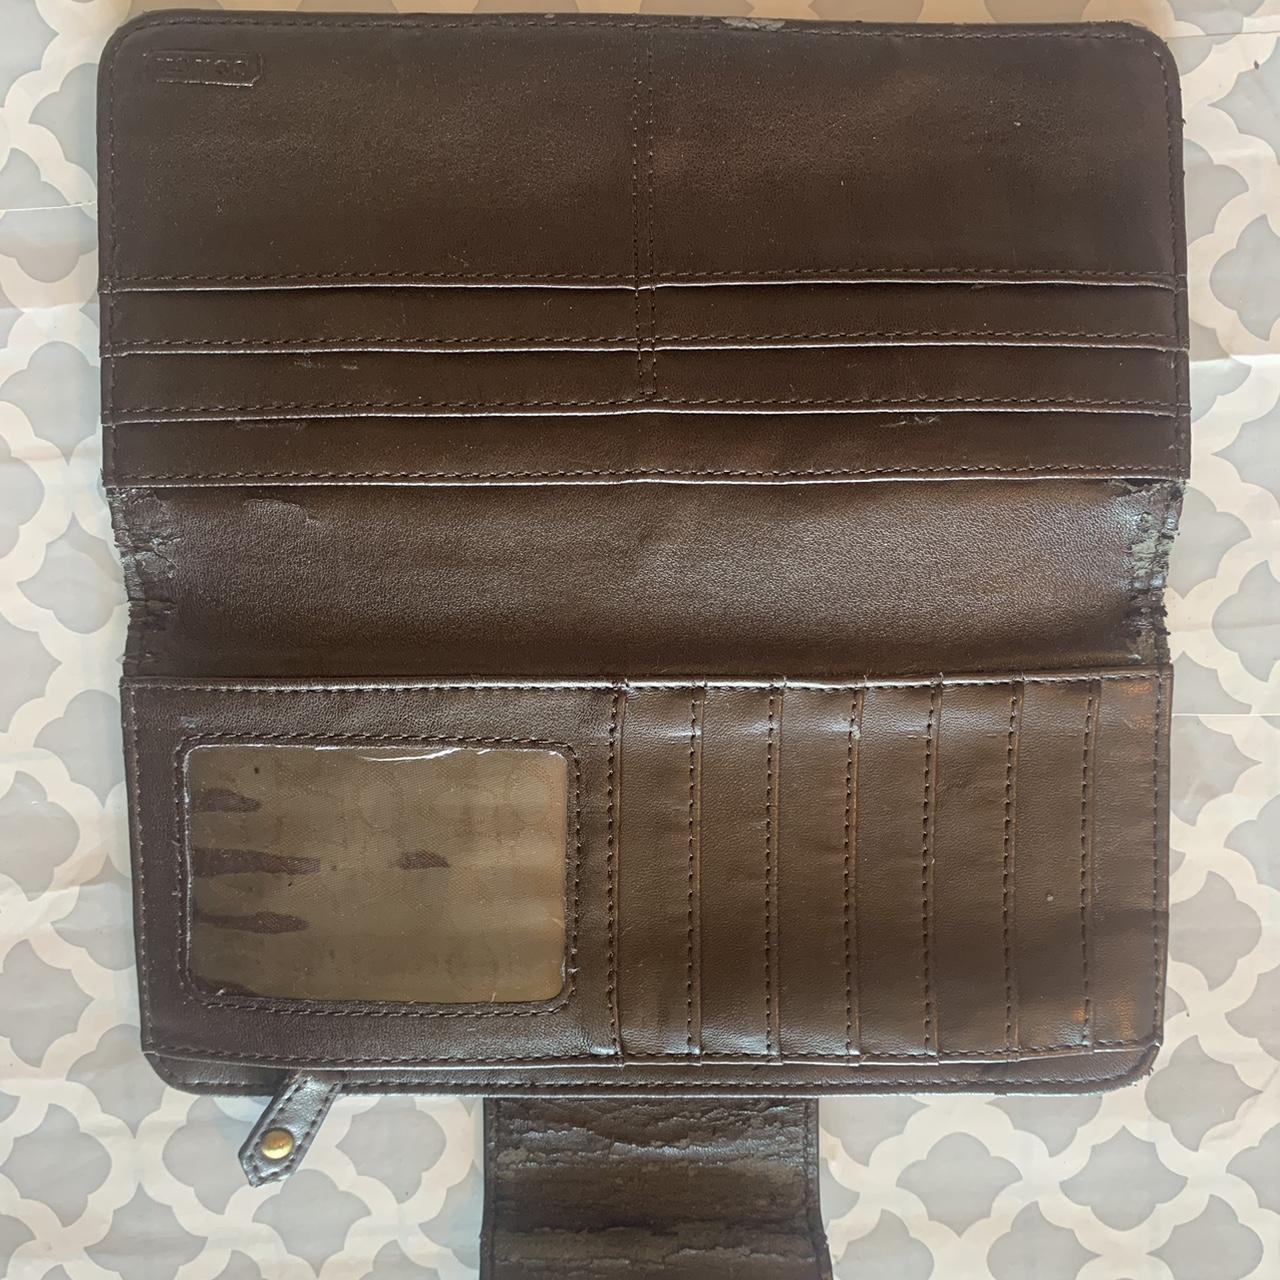 Coach wallet in decent condition with some wear and... - Depop